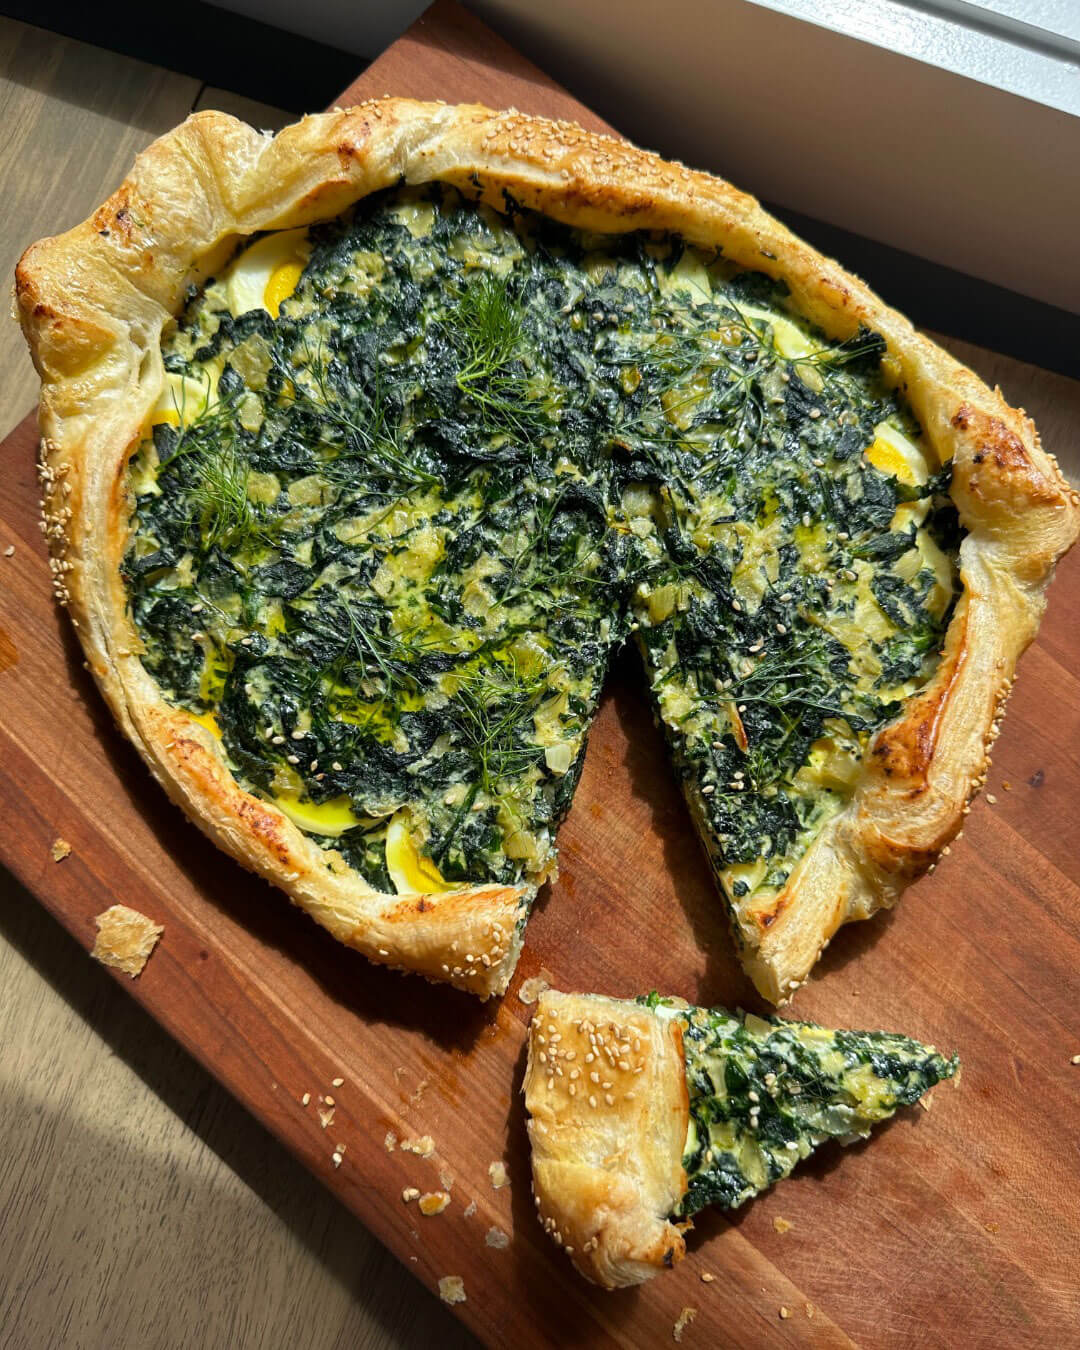 Spinach, Egg and Ricotta Galette (inspired by torta pasqualina!)